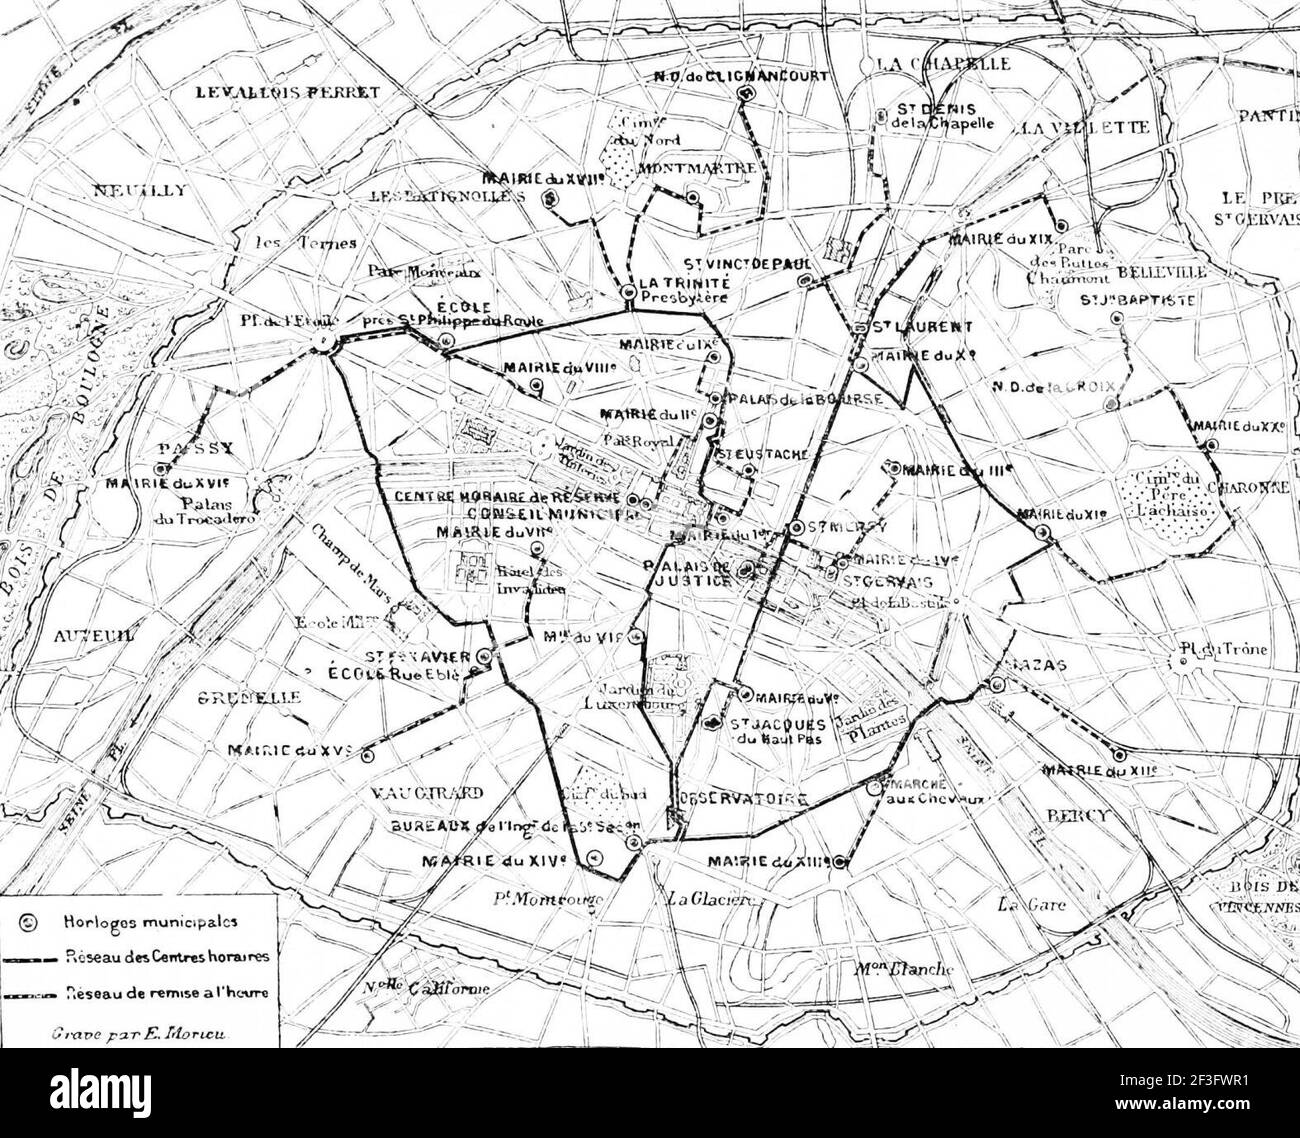 Map of paris with observatory circuit outlined in black. Stock Photo